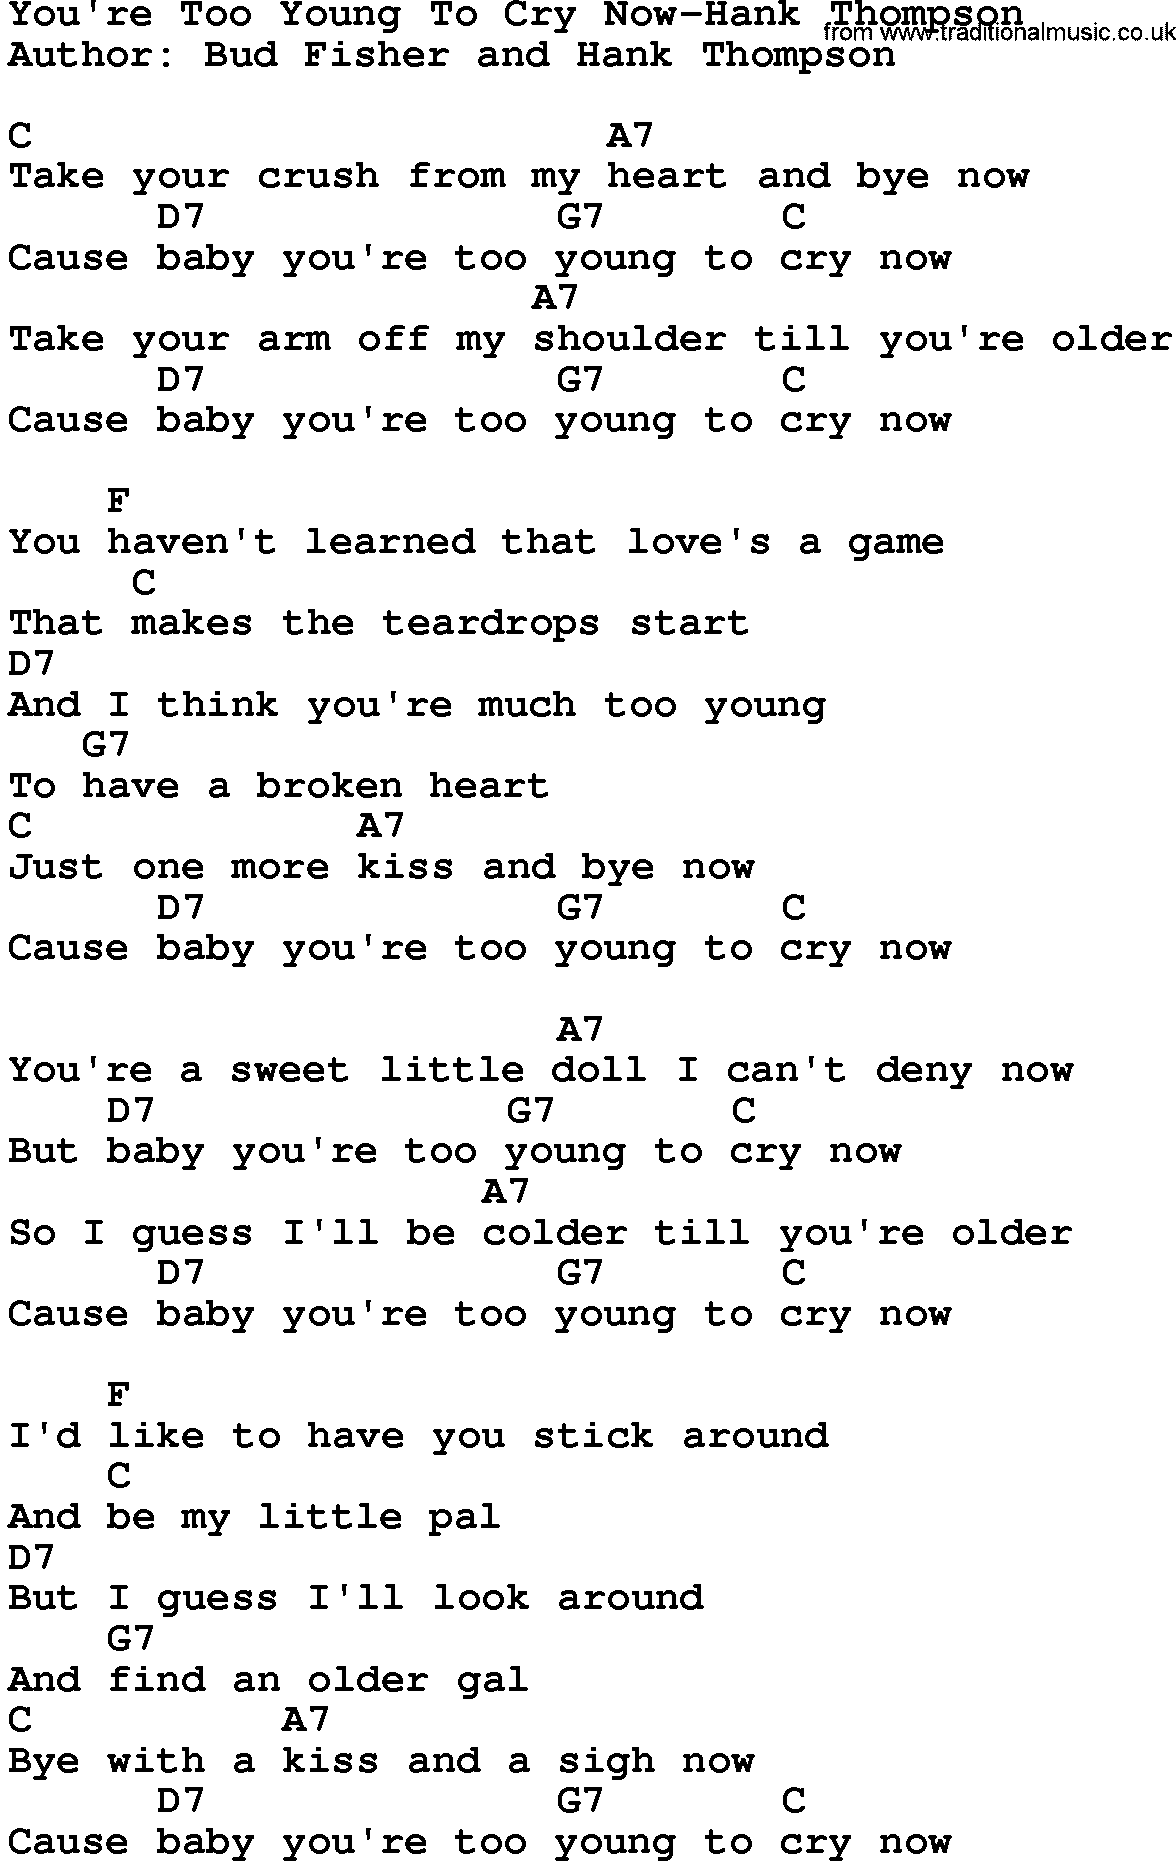 Country music song: You're Too Young To Cry Now-Hank Thompson lyrics and chords